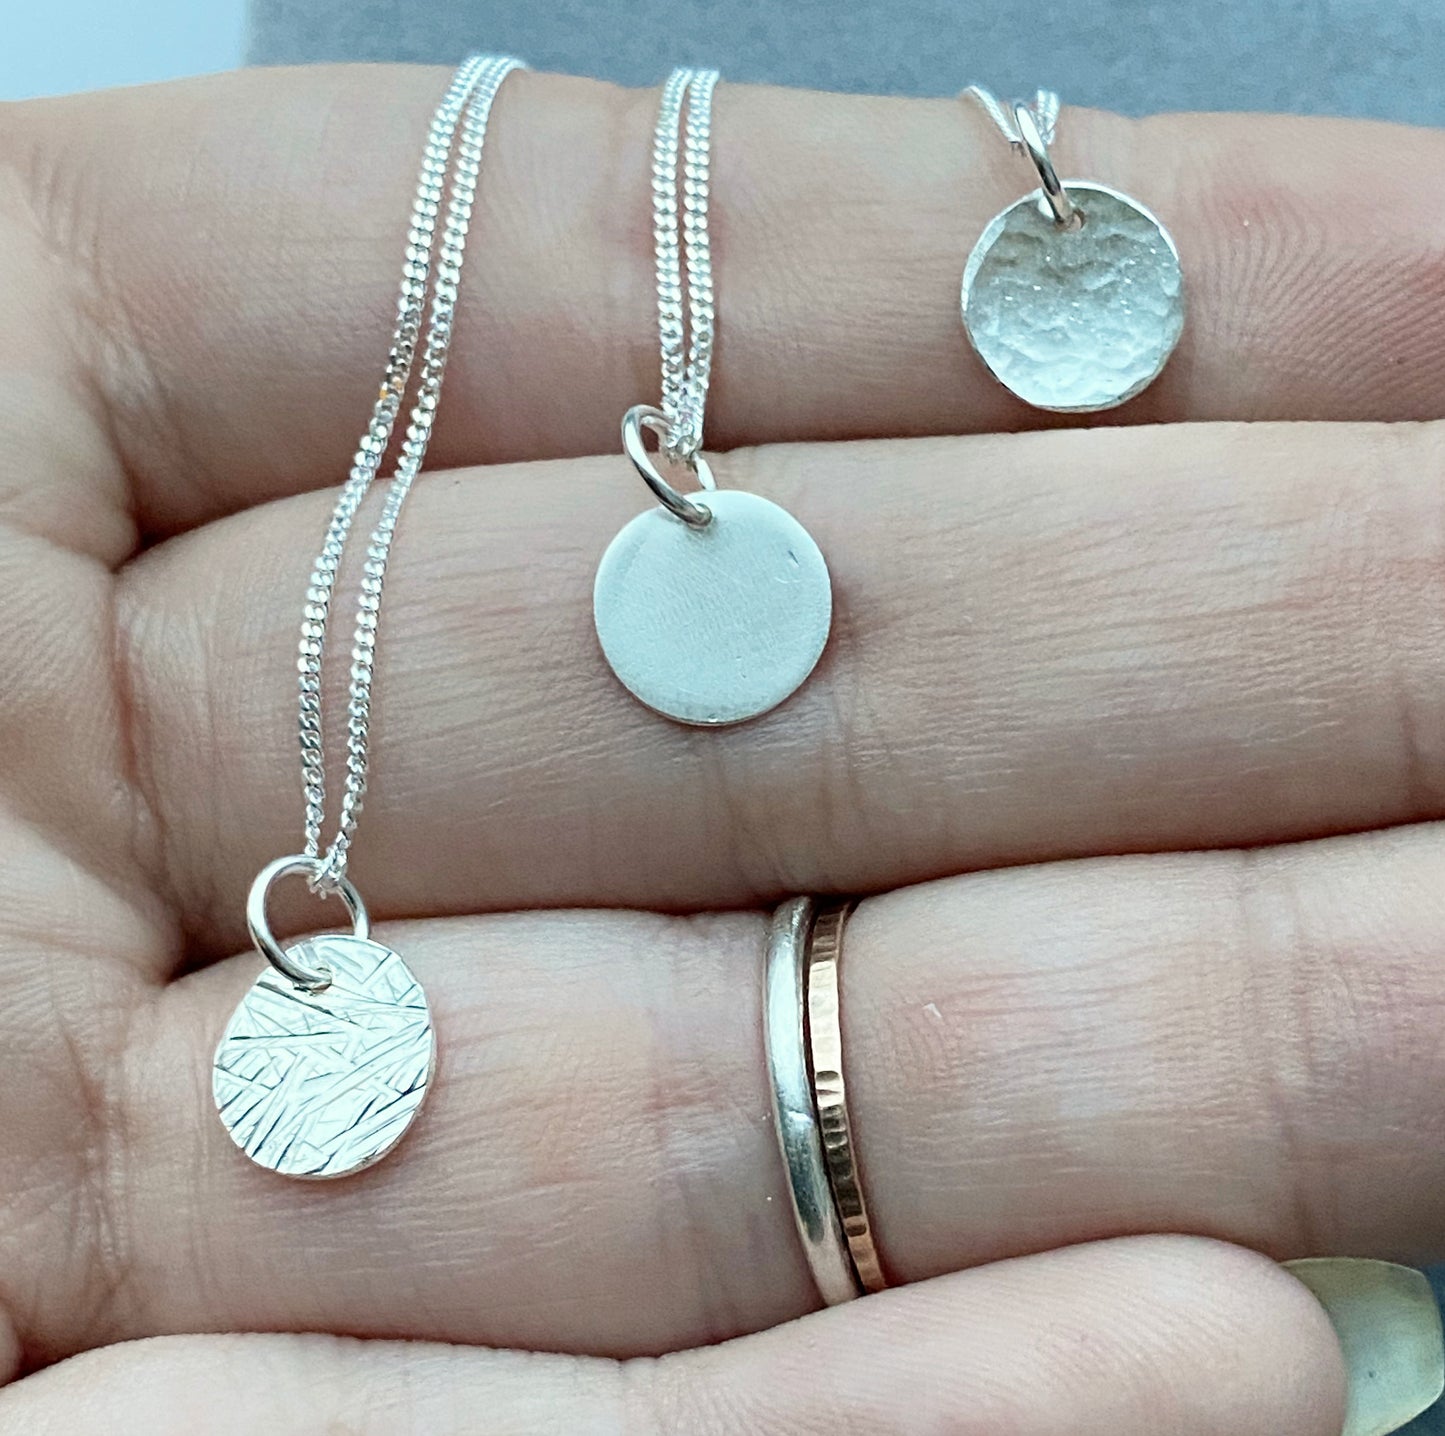 Silver disc necklace